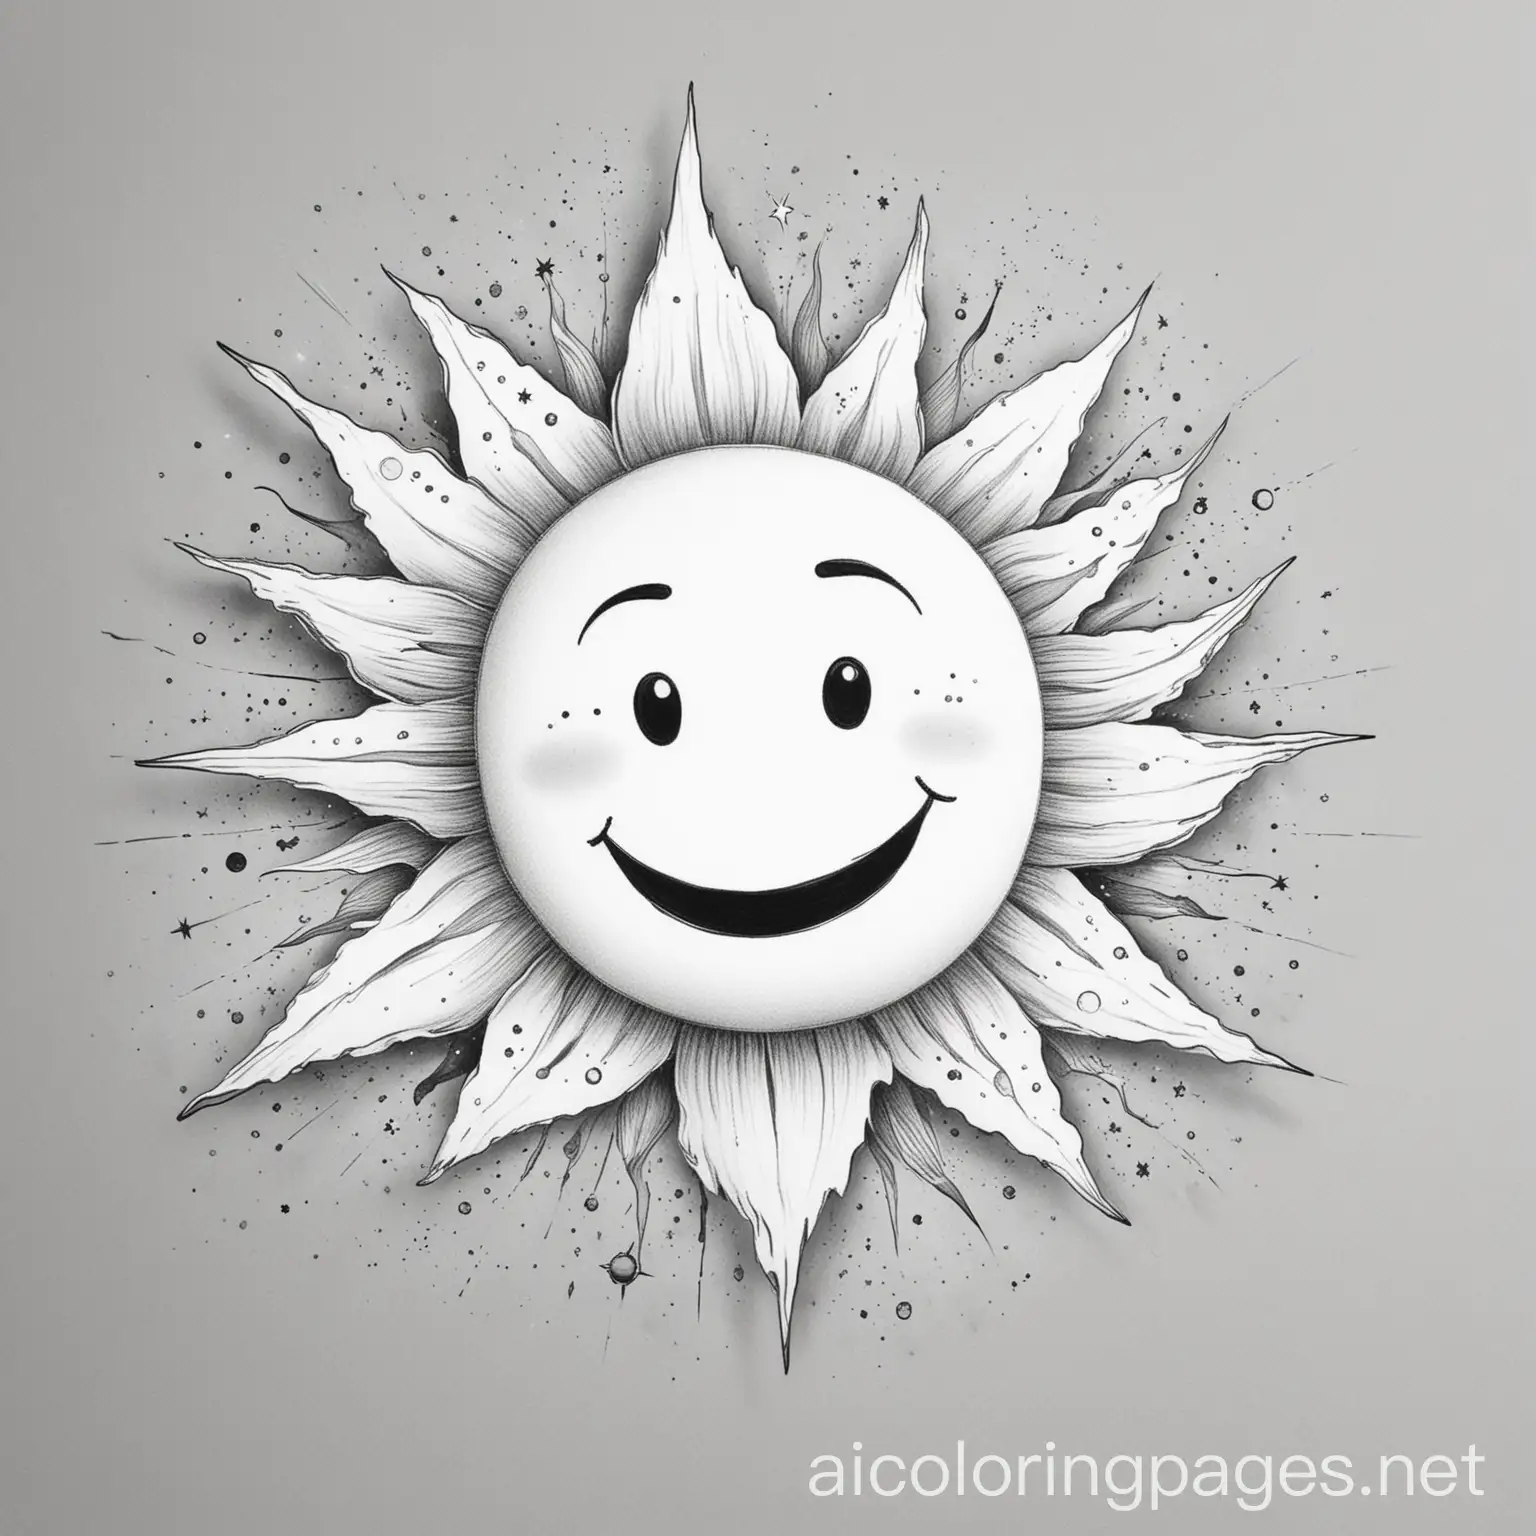 Smiling-Sun-in-Space-Coloring-Page-with-Simplicity-and-Ample-White-Space